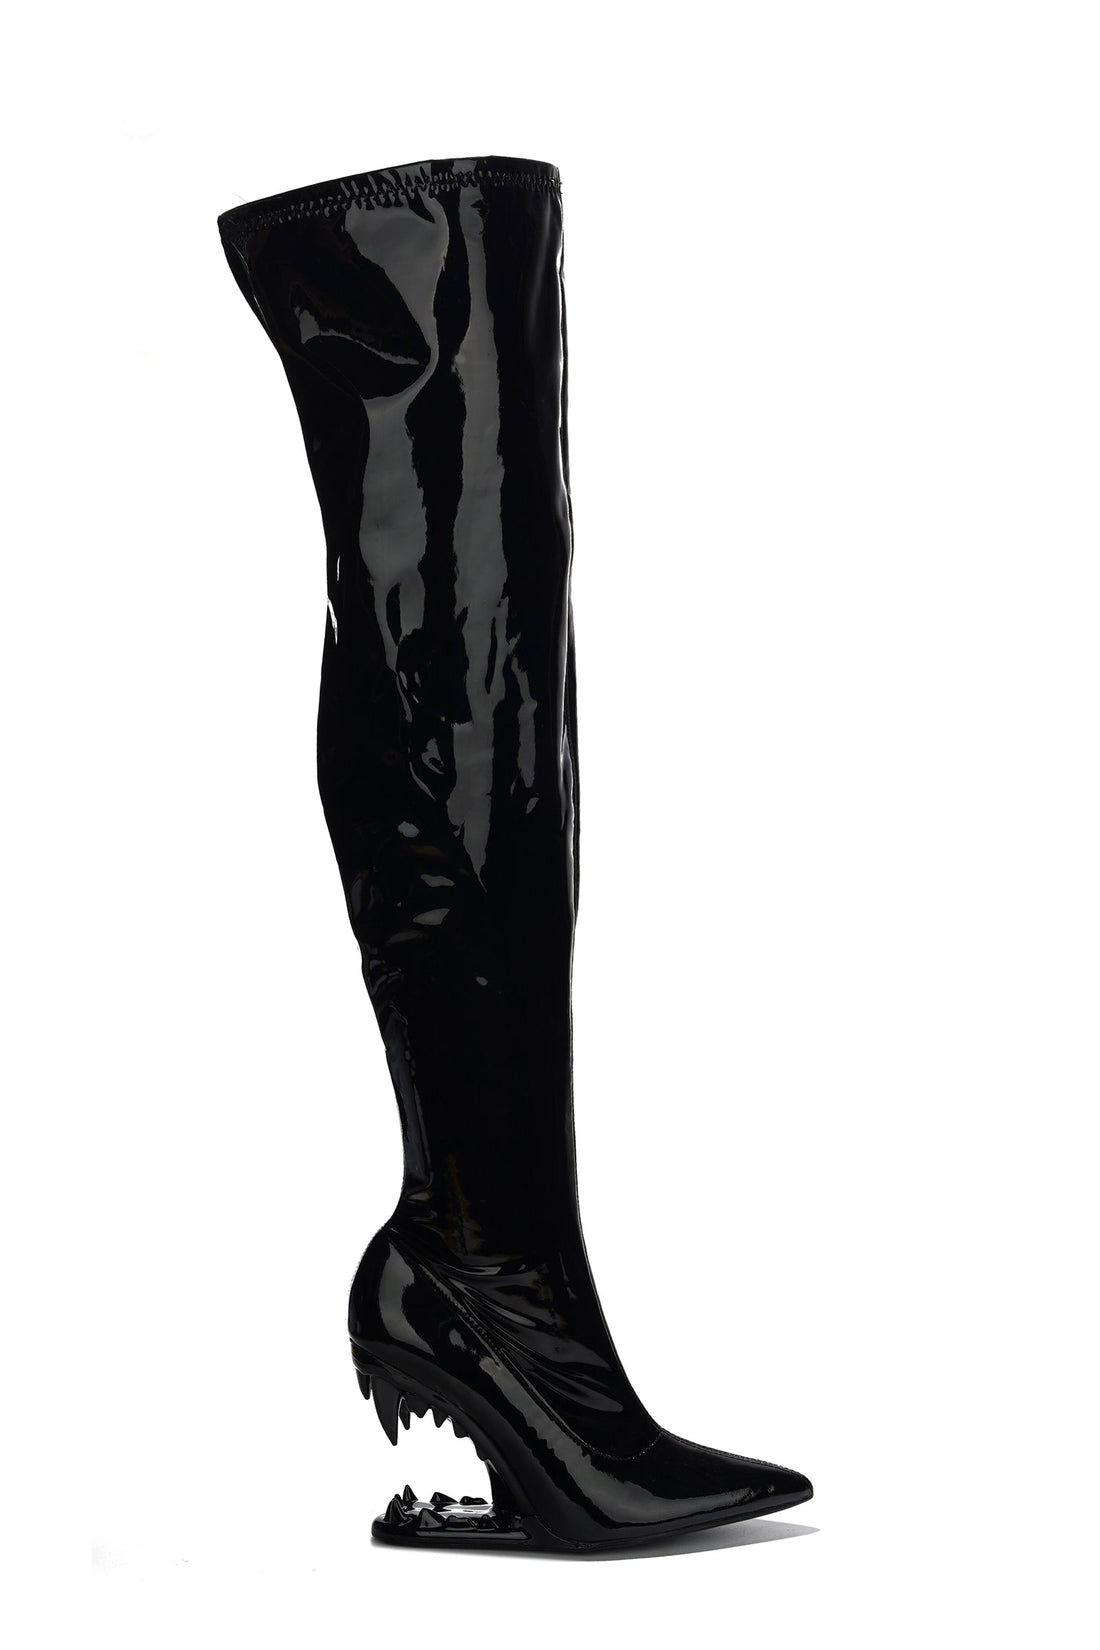 Unruly Patent Leather Over The Knee Boots